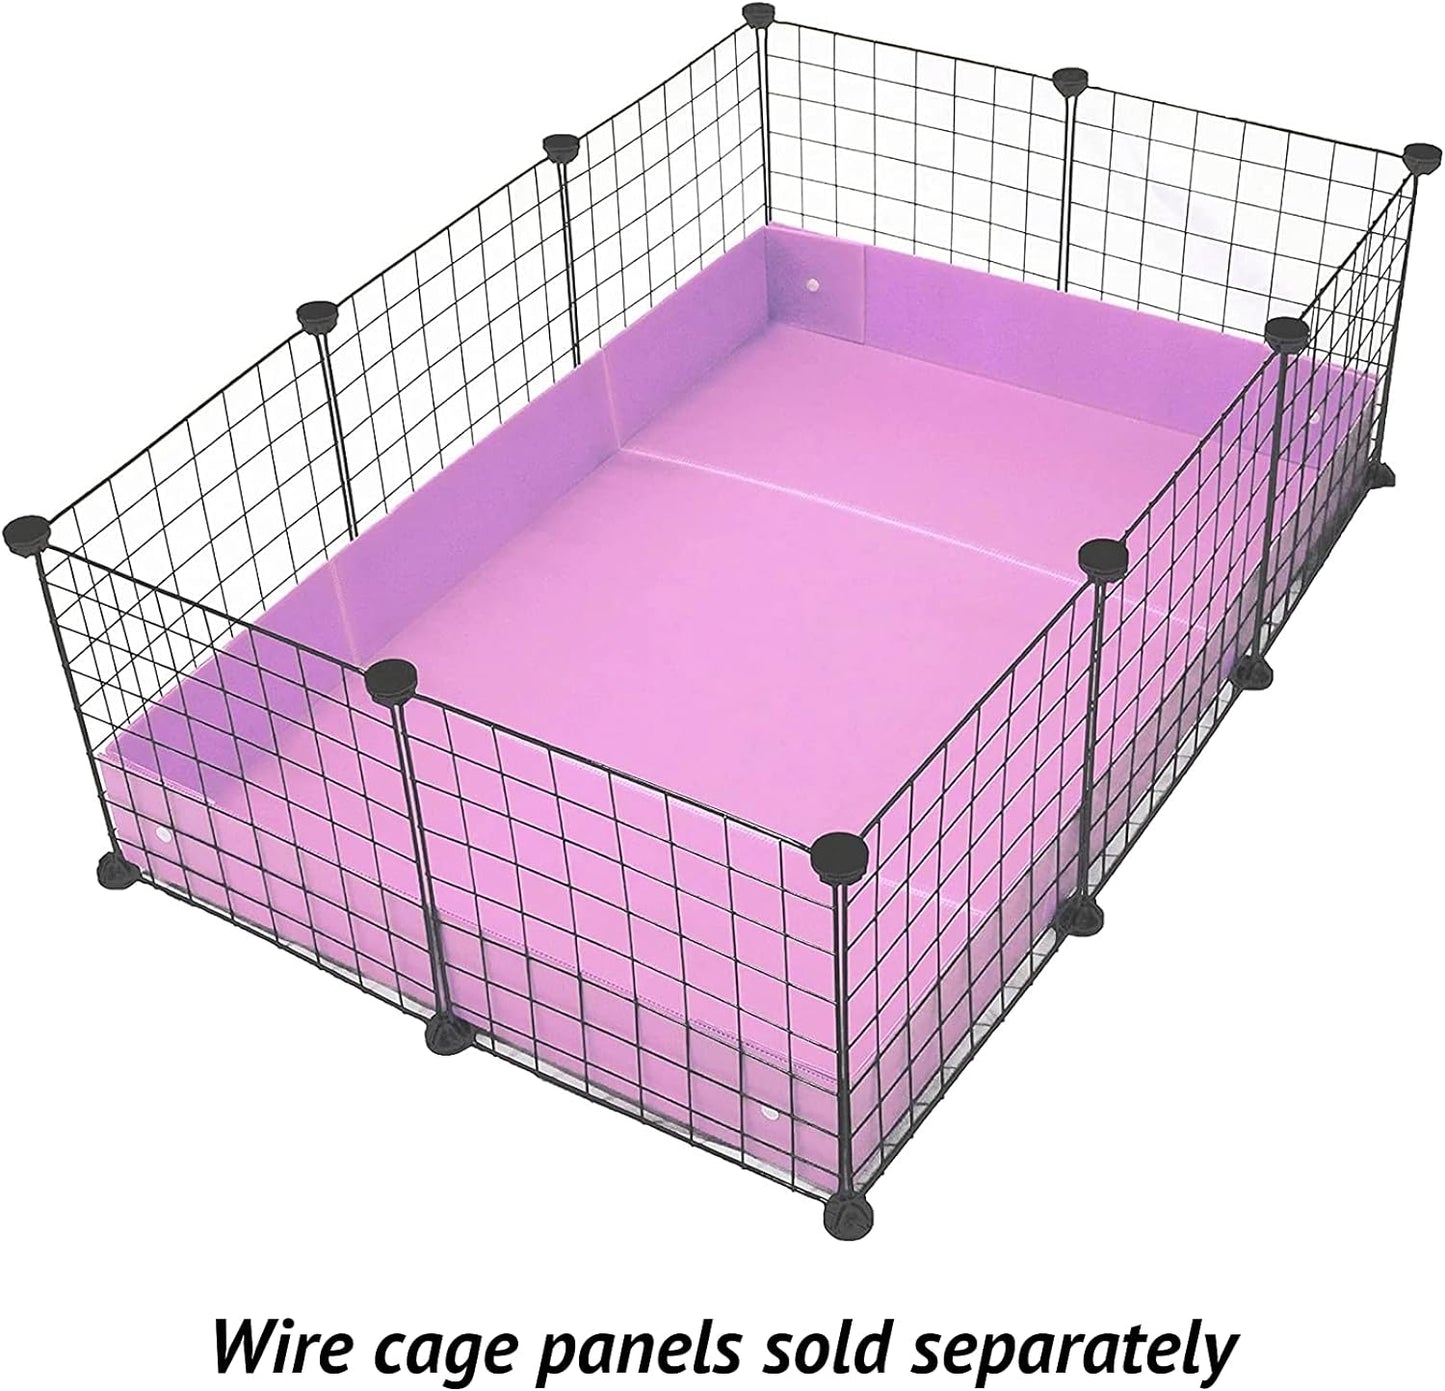 Midlee Guinea Pig Corrugated Plastic Cage Liners - 2 x 3 Panel Size - Purple